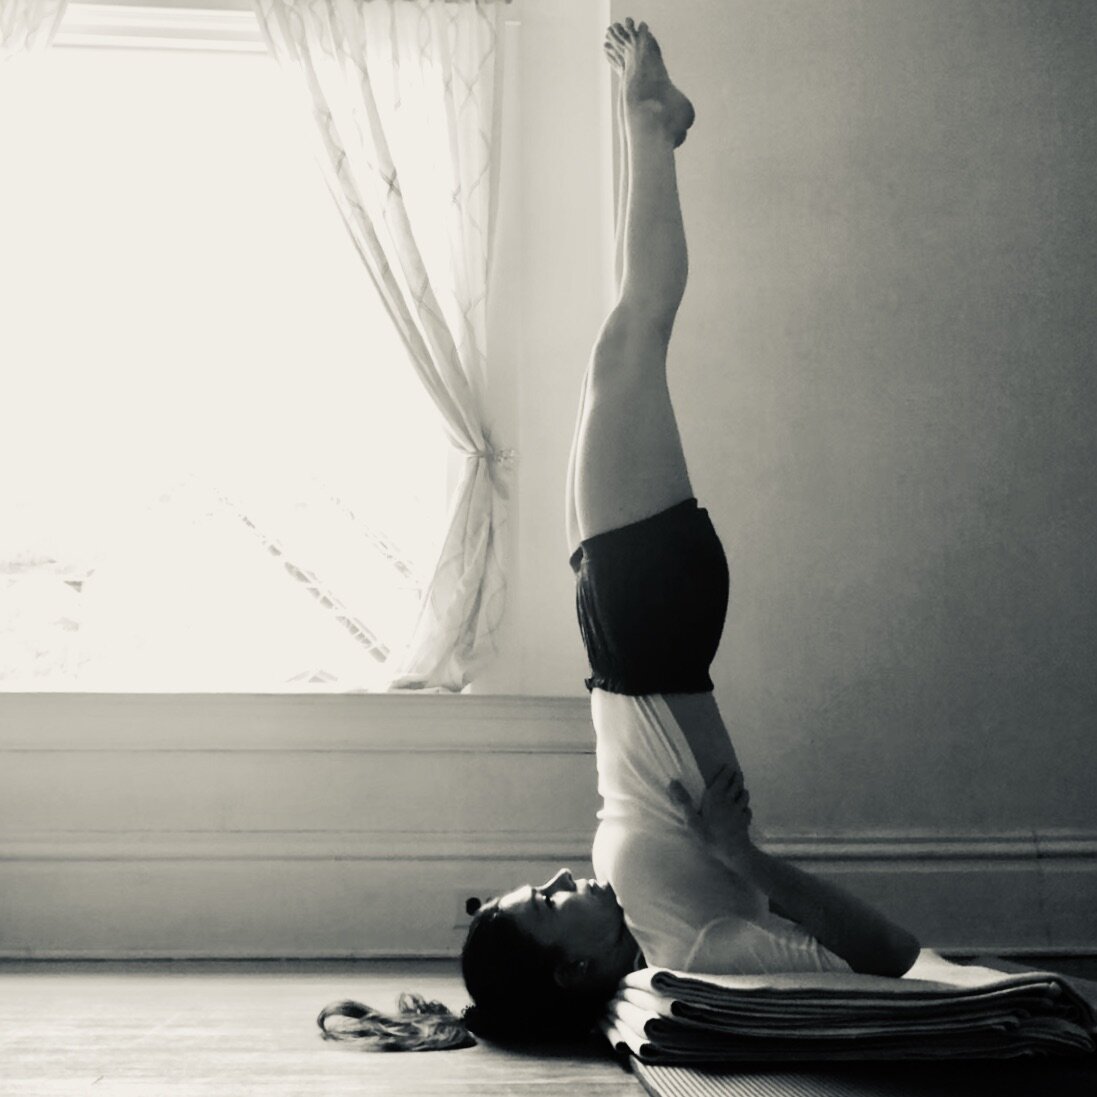 Yoga Practice for Troubled Times: for Immunity — Light on Yoga